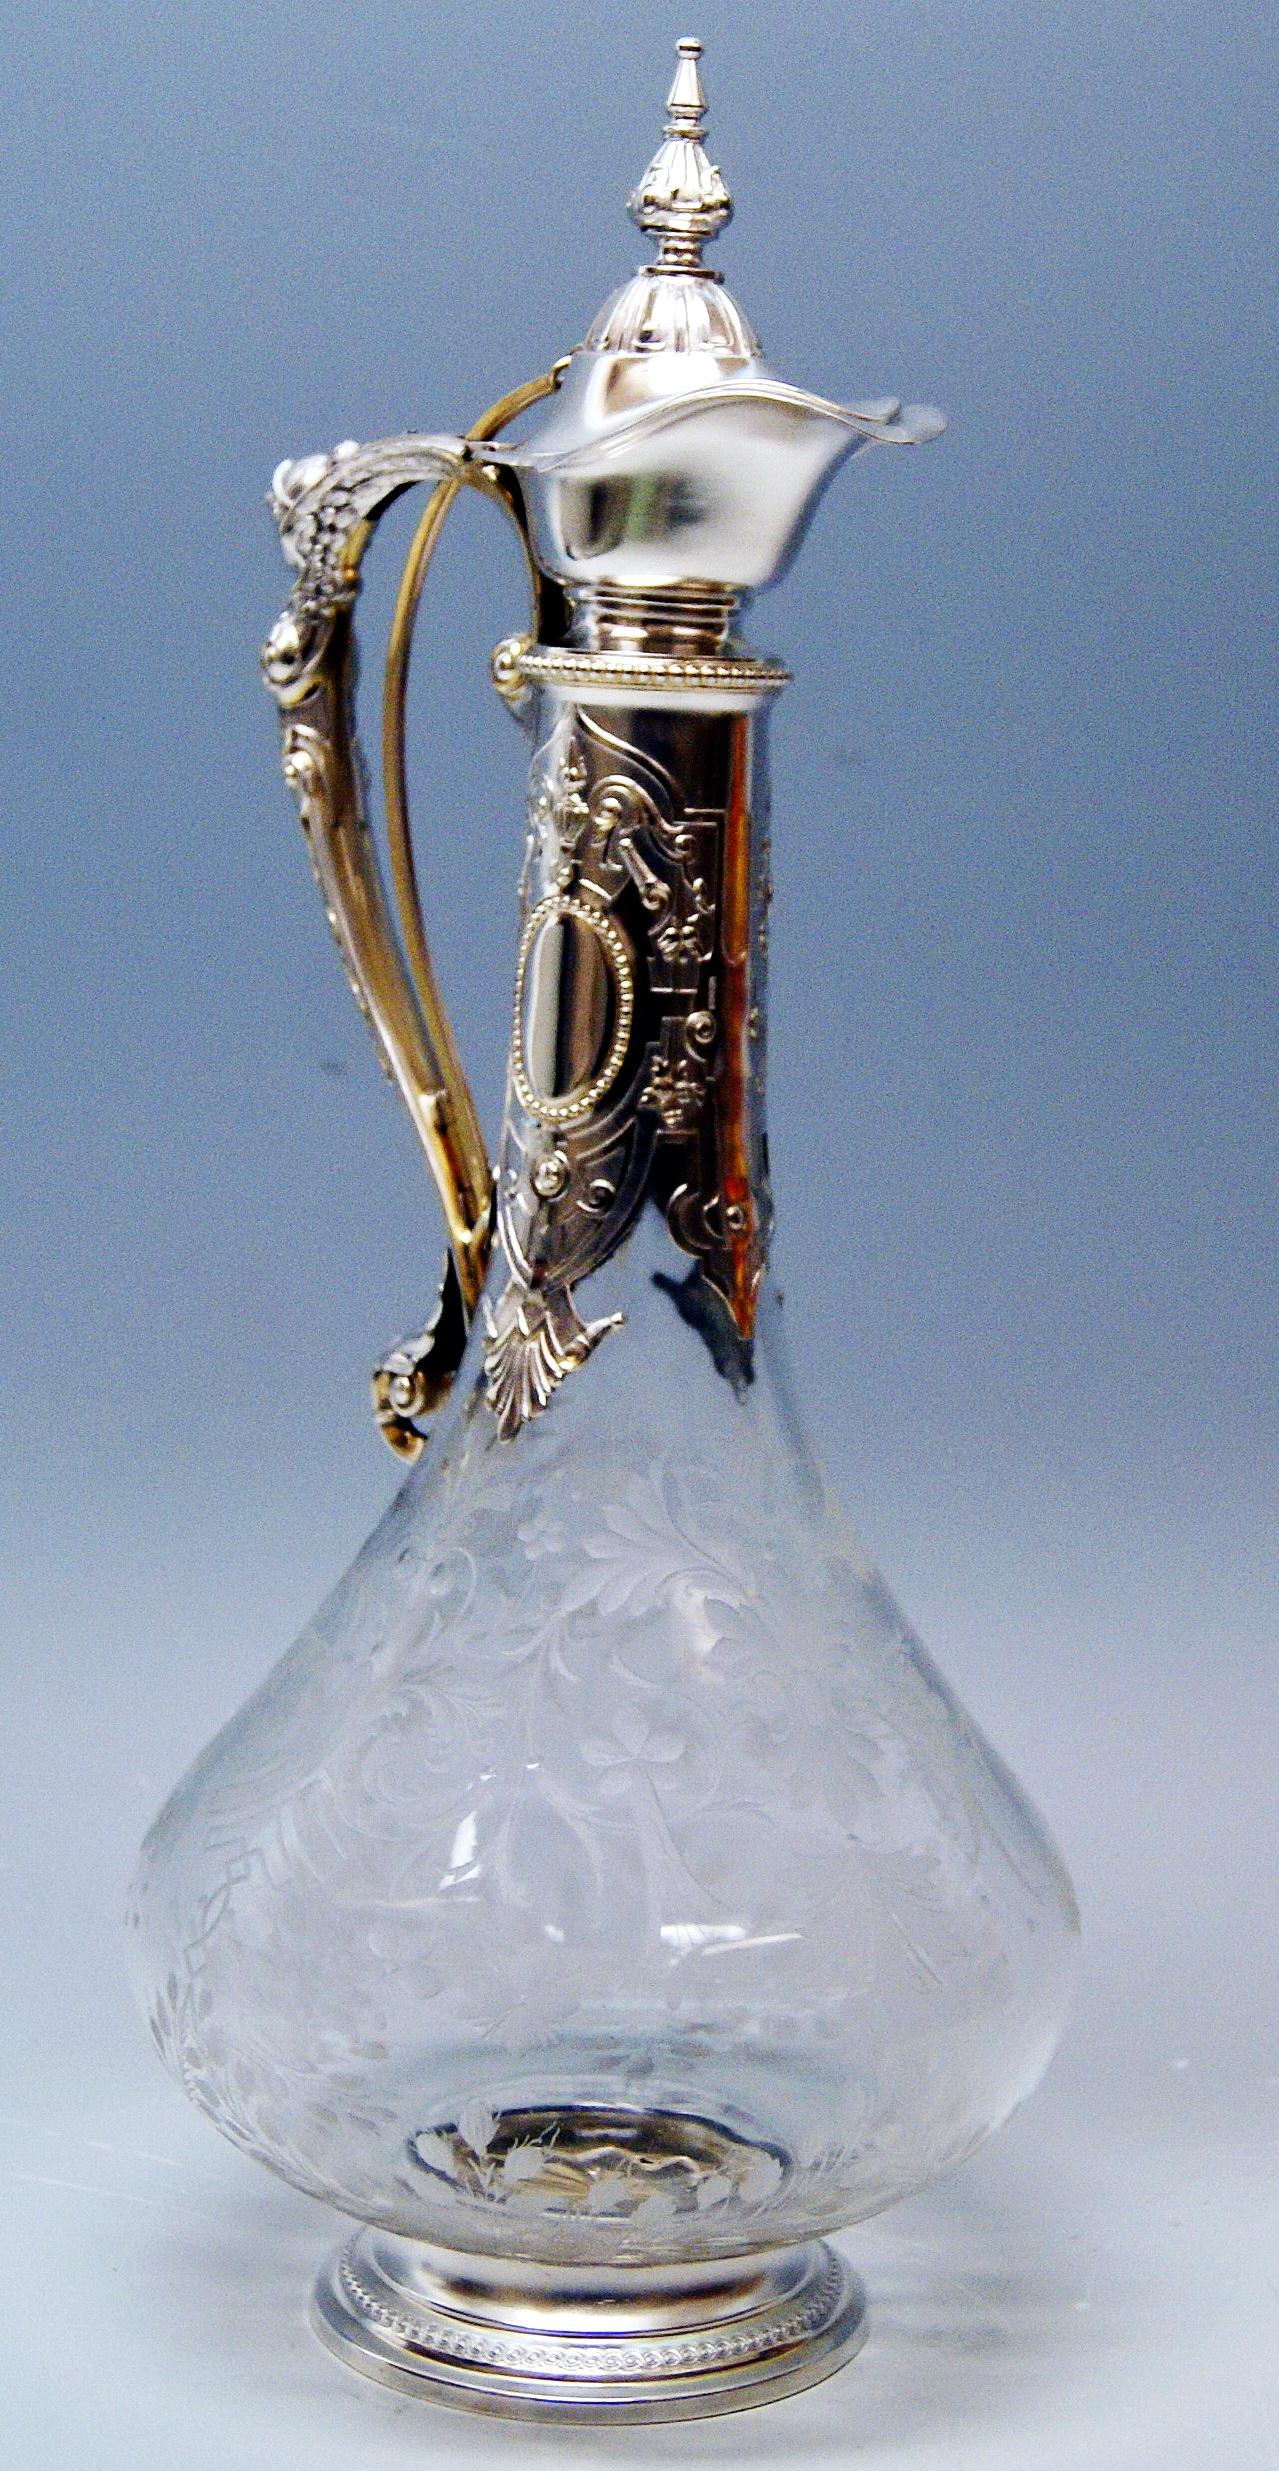 Glass decanter (wine carafe) with silver mountings made during period of Historicism.
Hallmarked:
-- SILVER 800 AUSTRIAN HALLMARK = symbol of wing with sign 4W

Made circa 1880-1890

Specifications:
The decanter's form is pear - shaped;  the